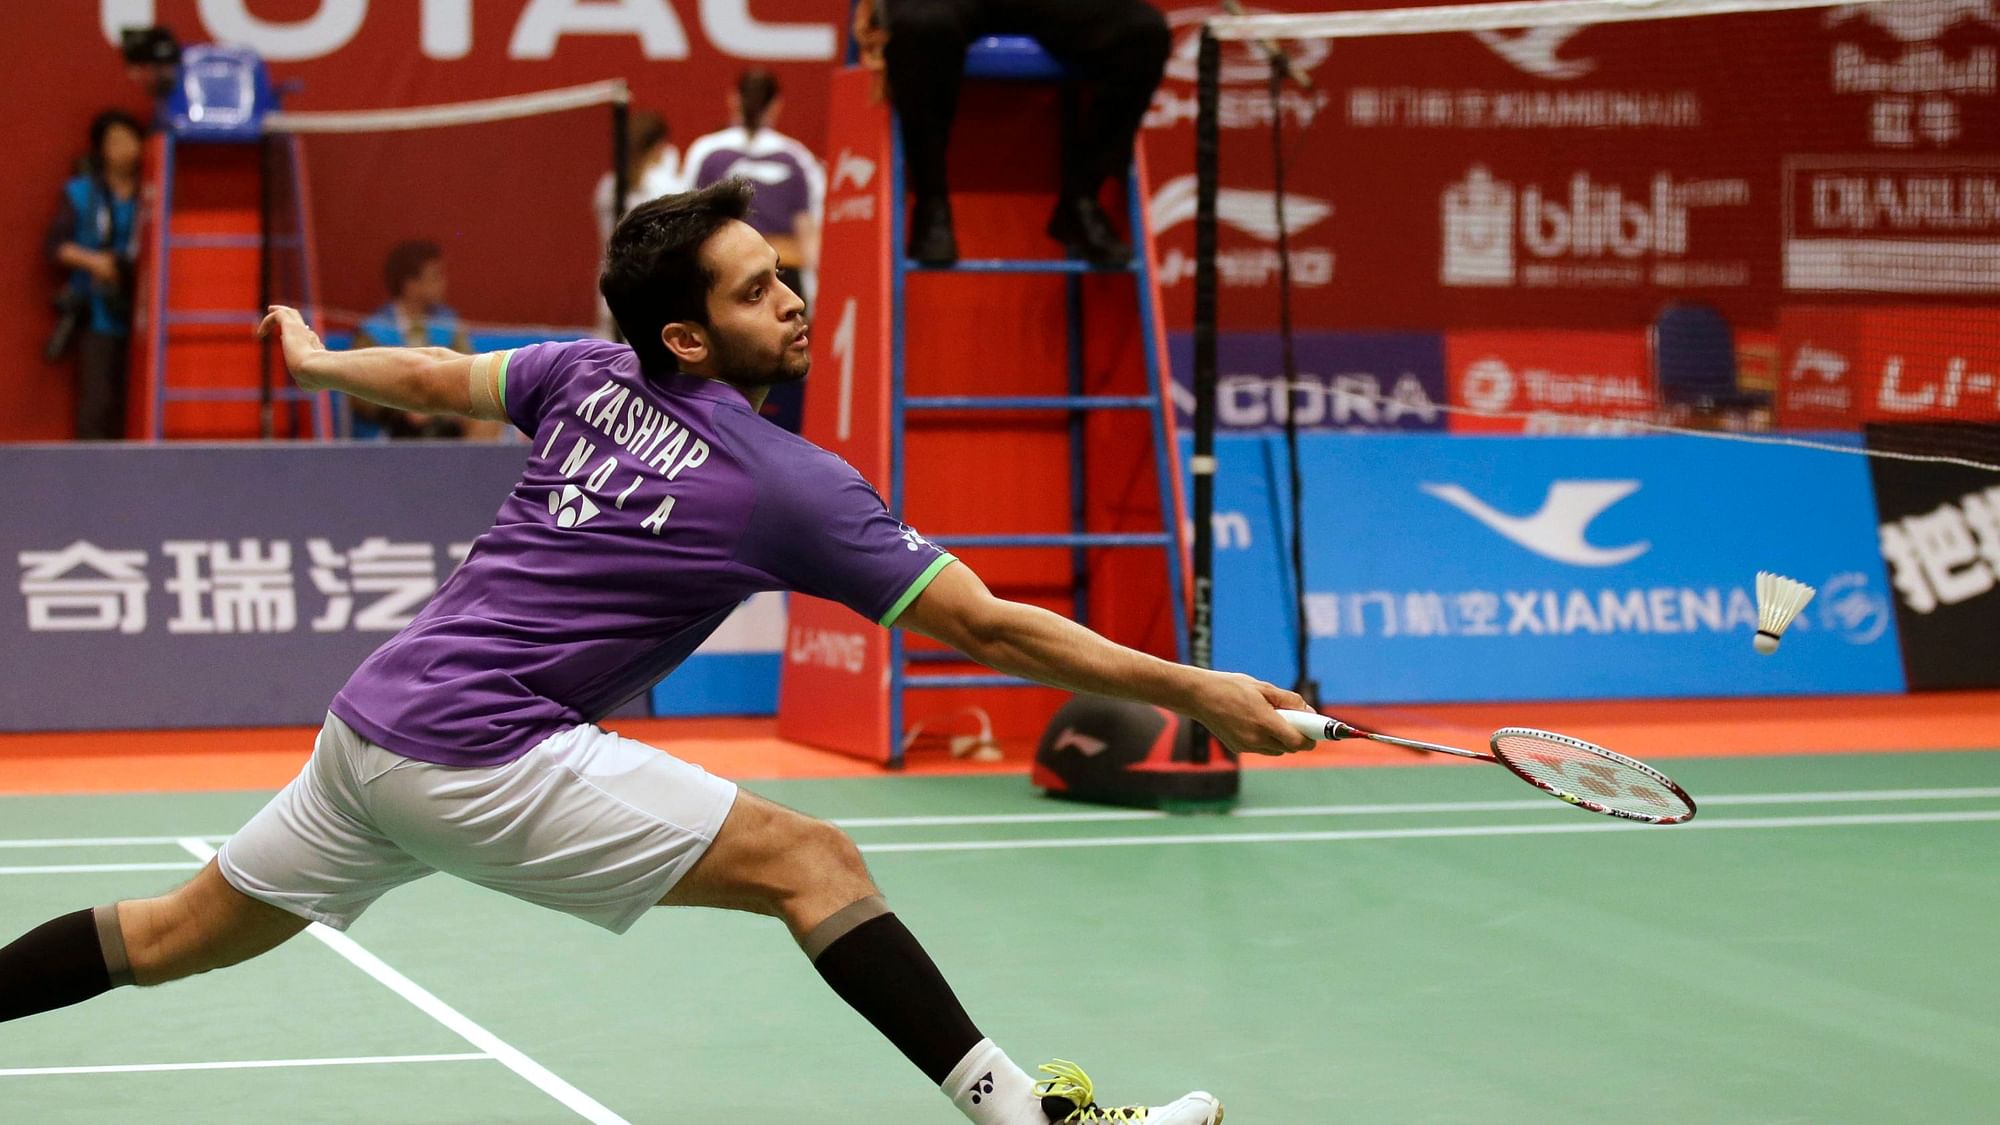 Parupalli Kashyap has been knocked out of the Korea Open in the semi-finals.